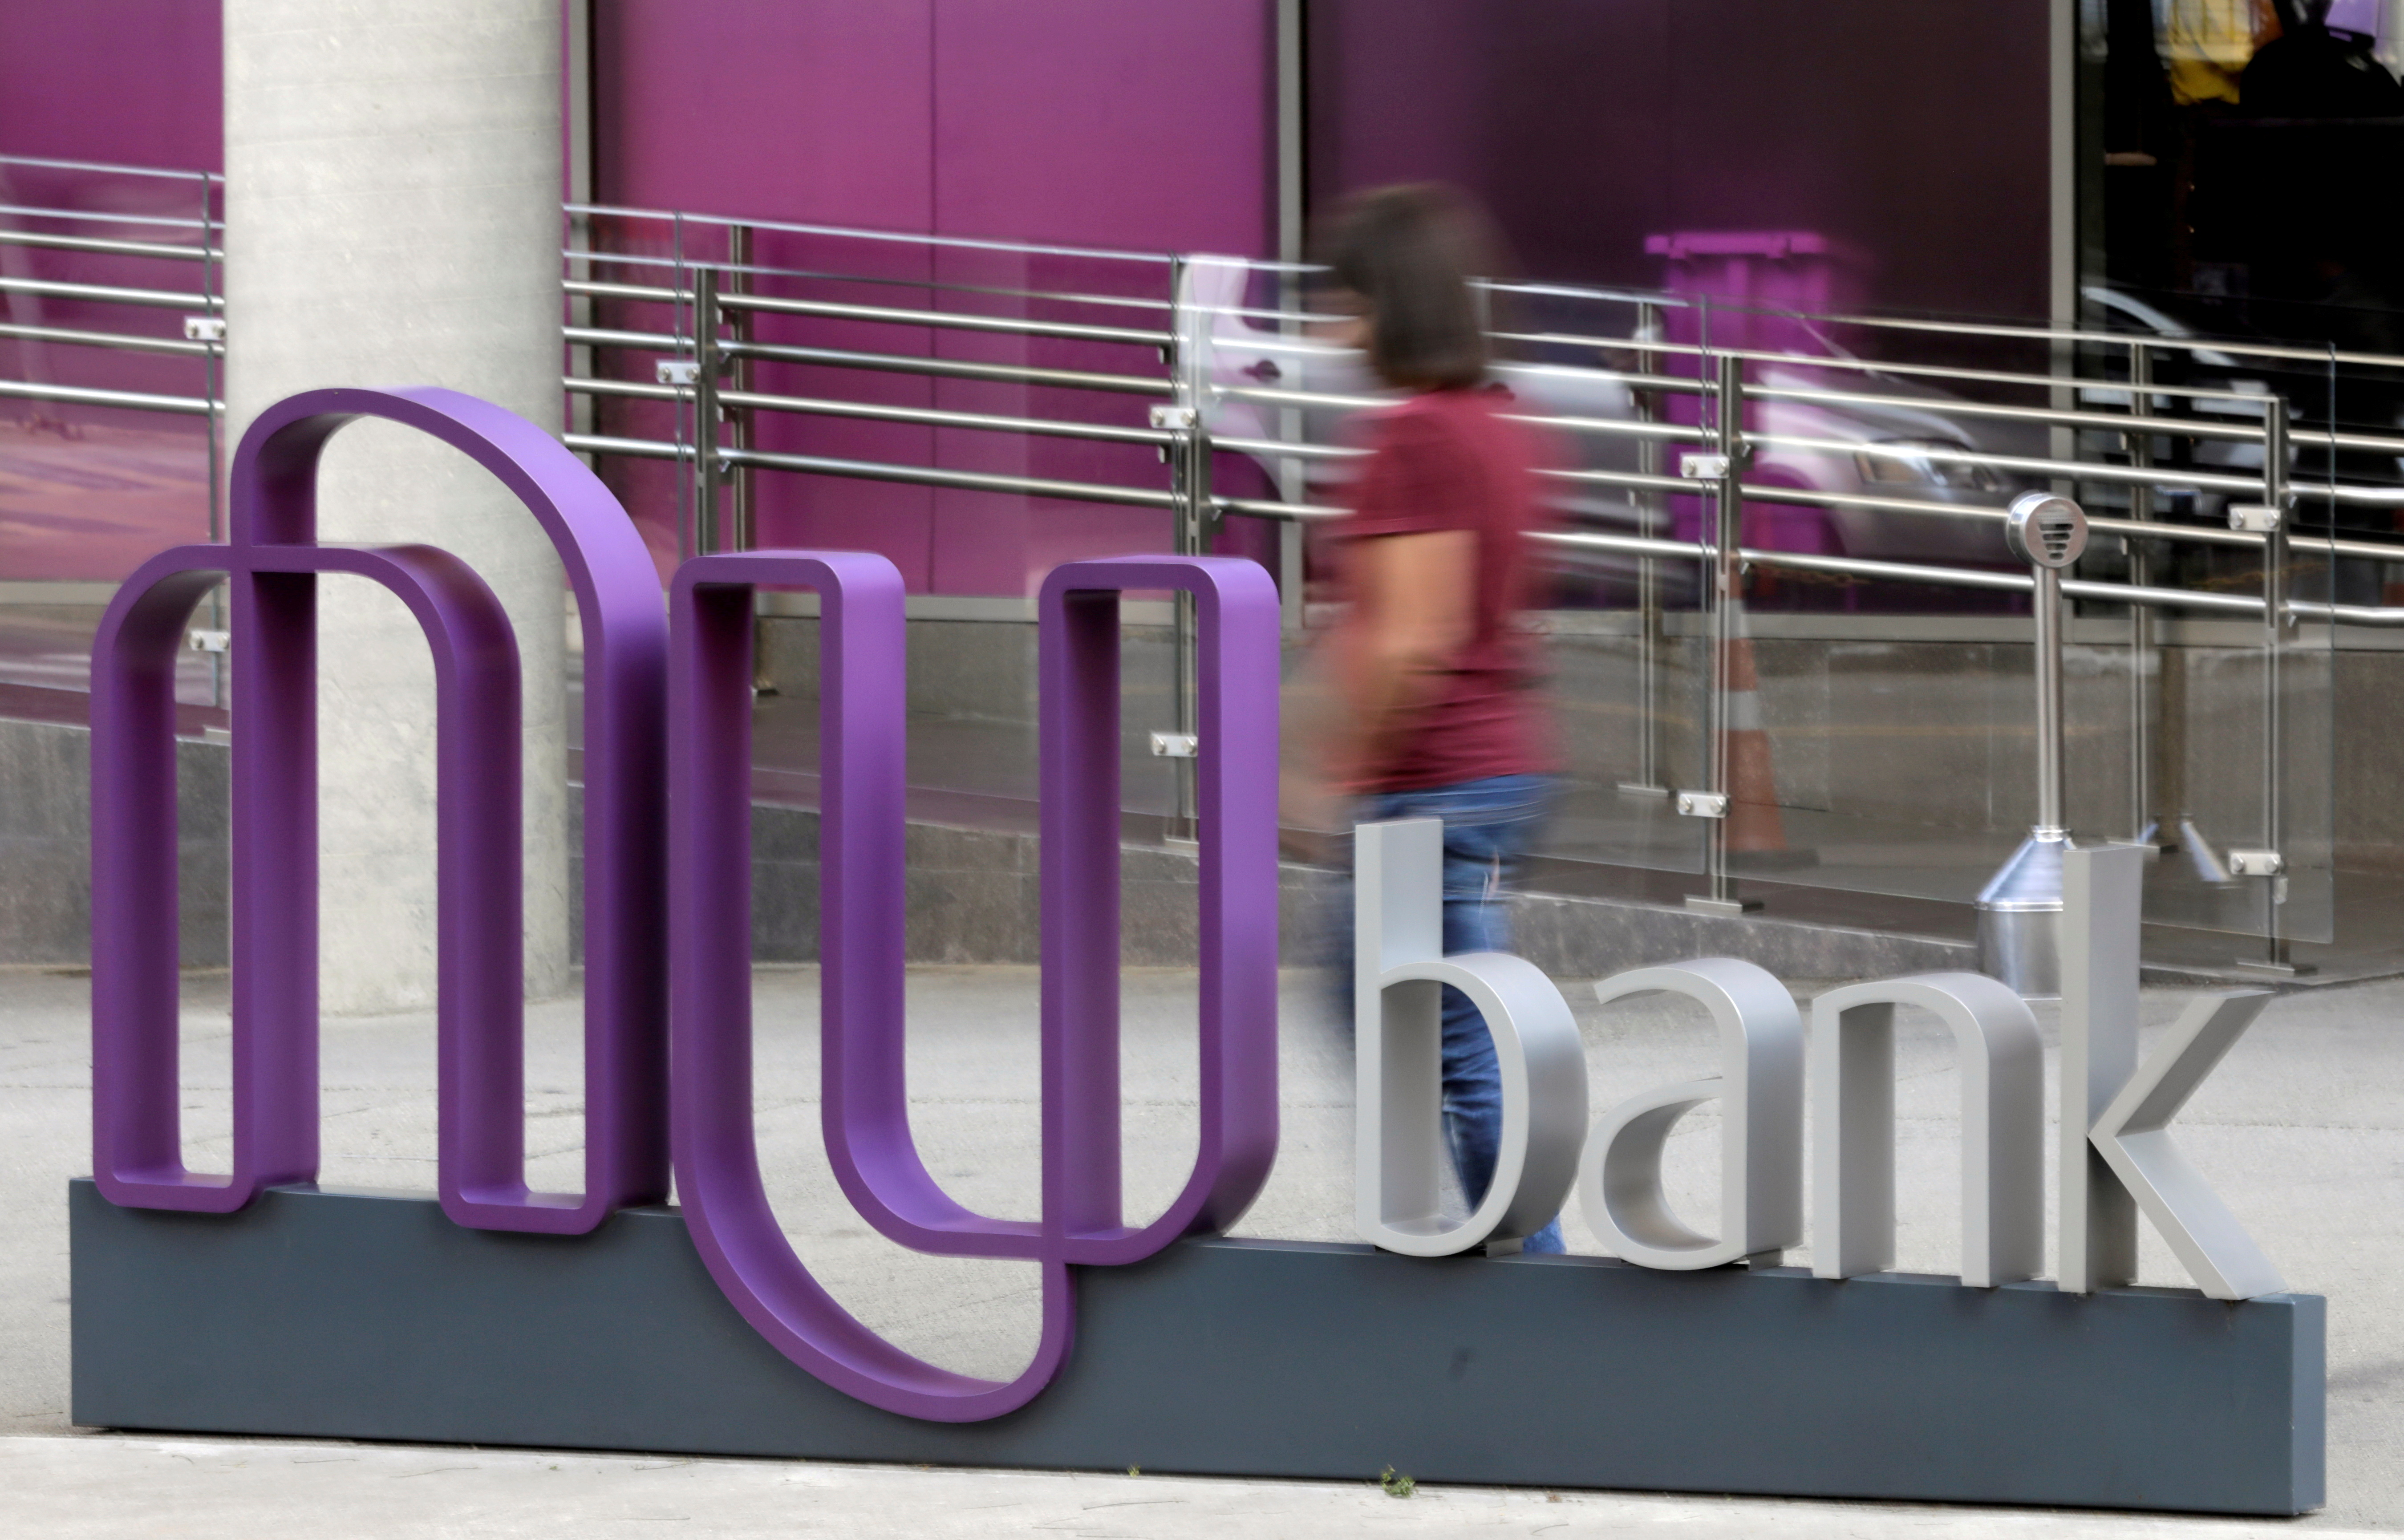 The logo of Nubank, a Brazilian fintech startup, is pictured at the bank's headquarters in Sao Paulo